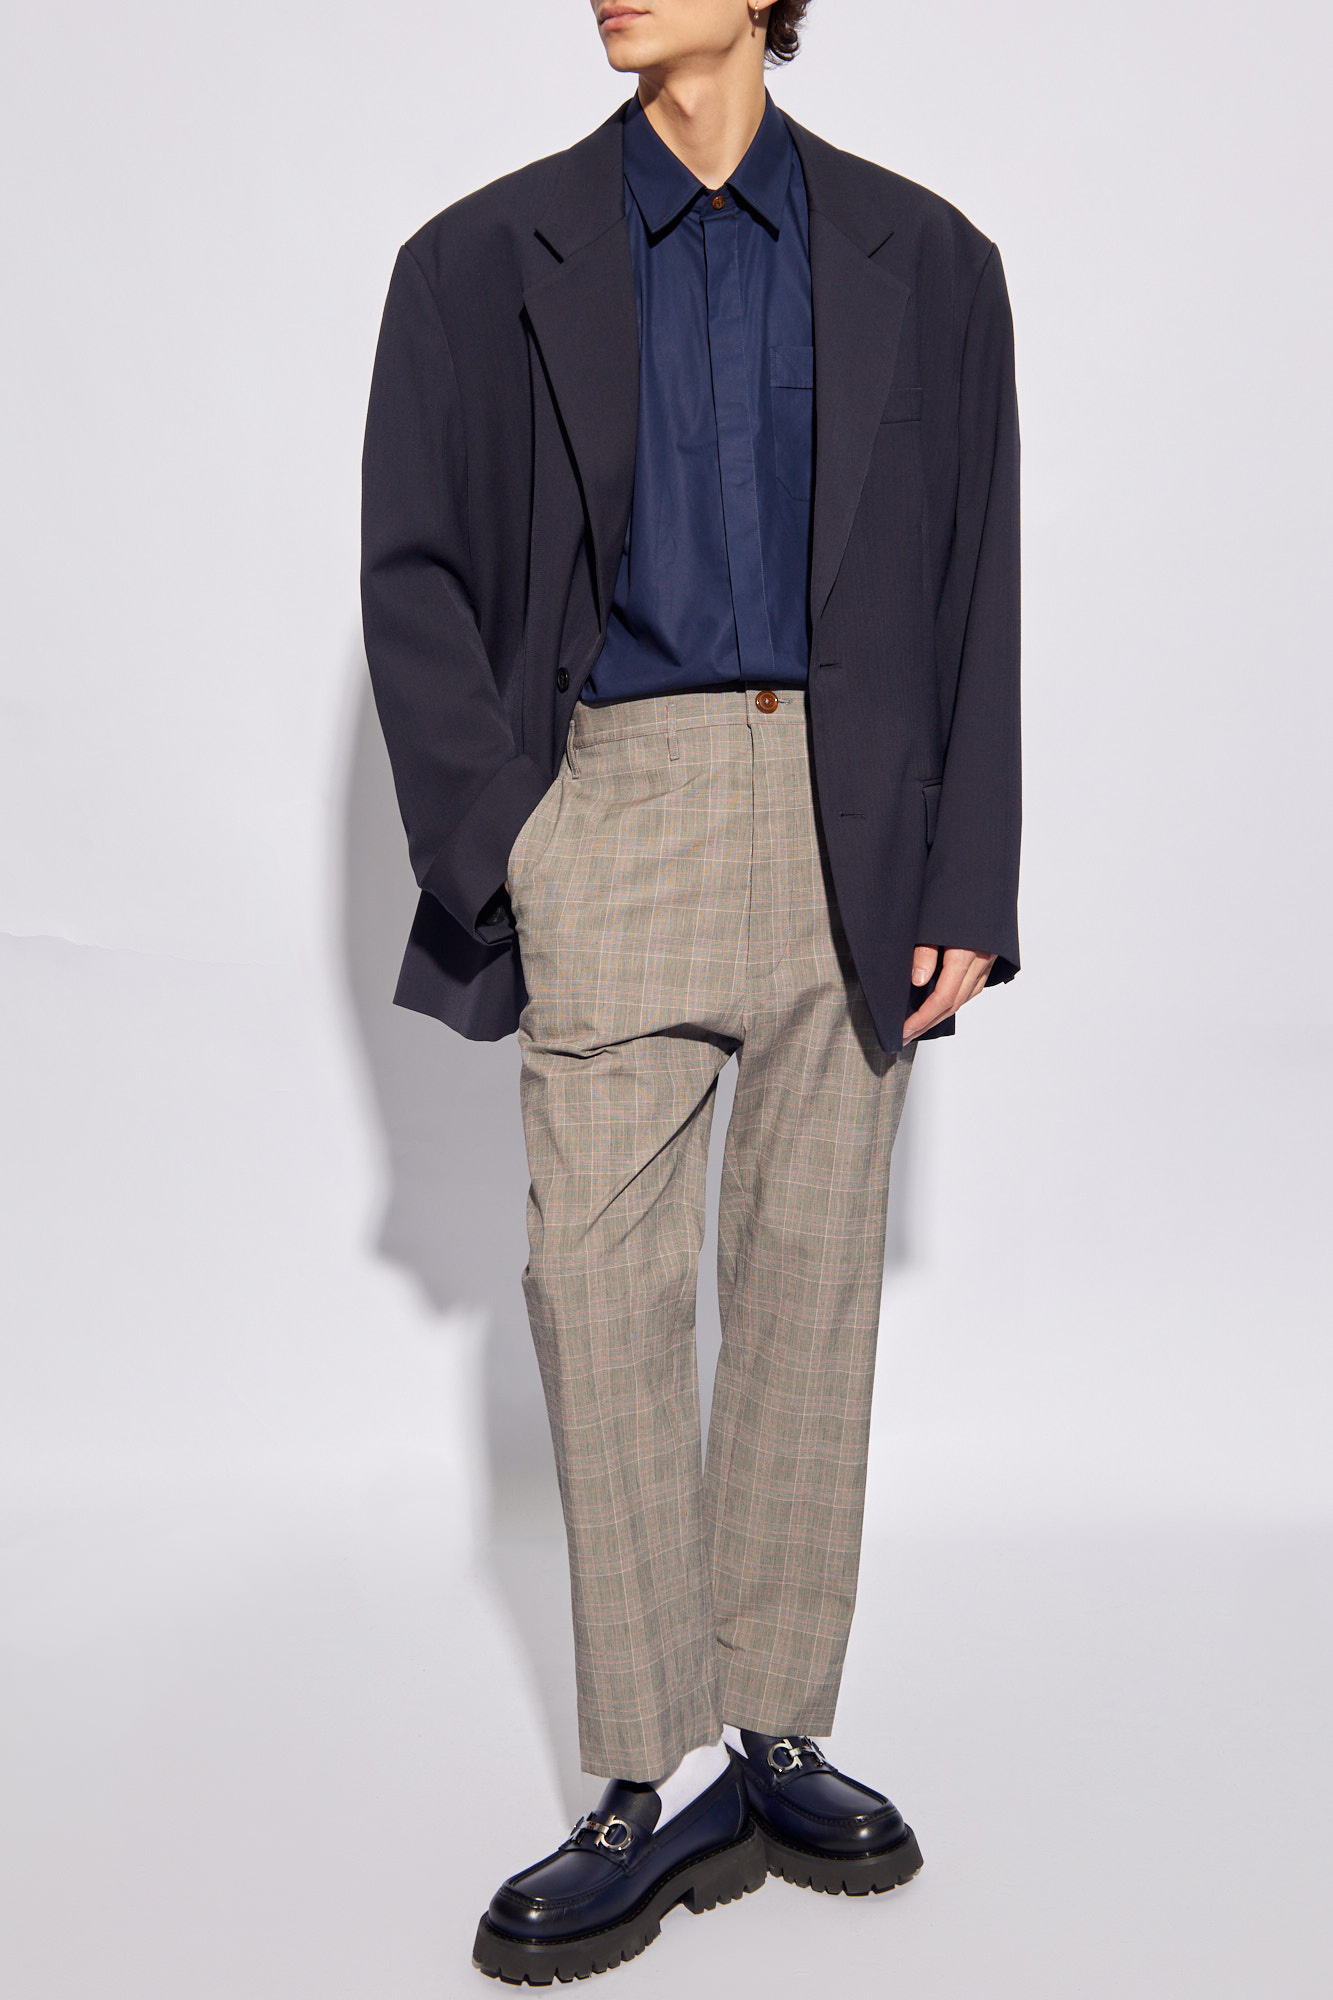 Vivienne Westwood ‘Cruise’ checked gathered trousers